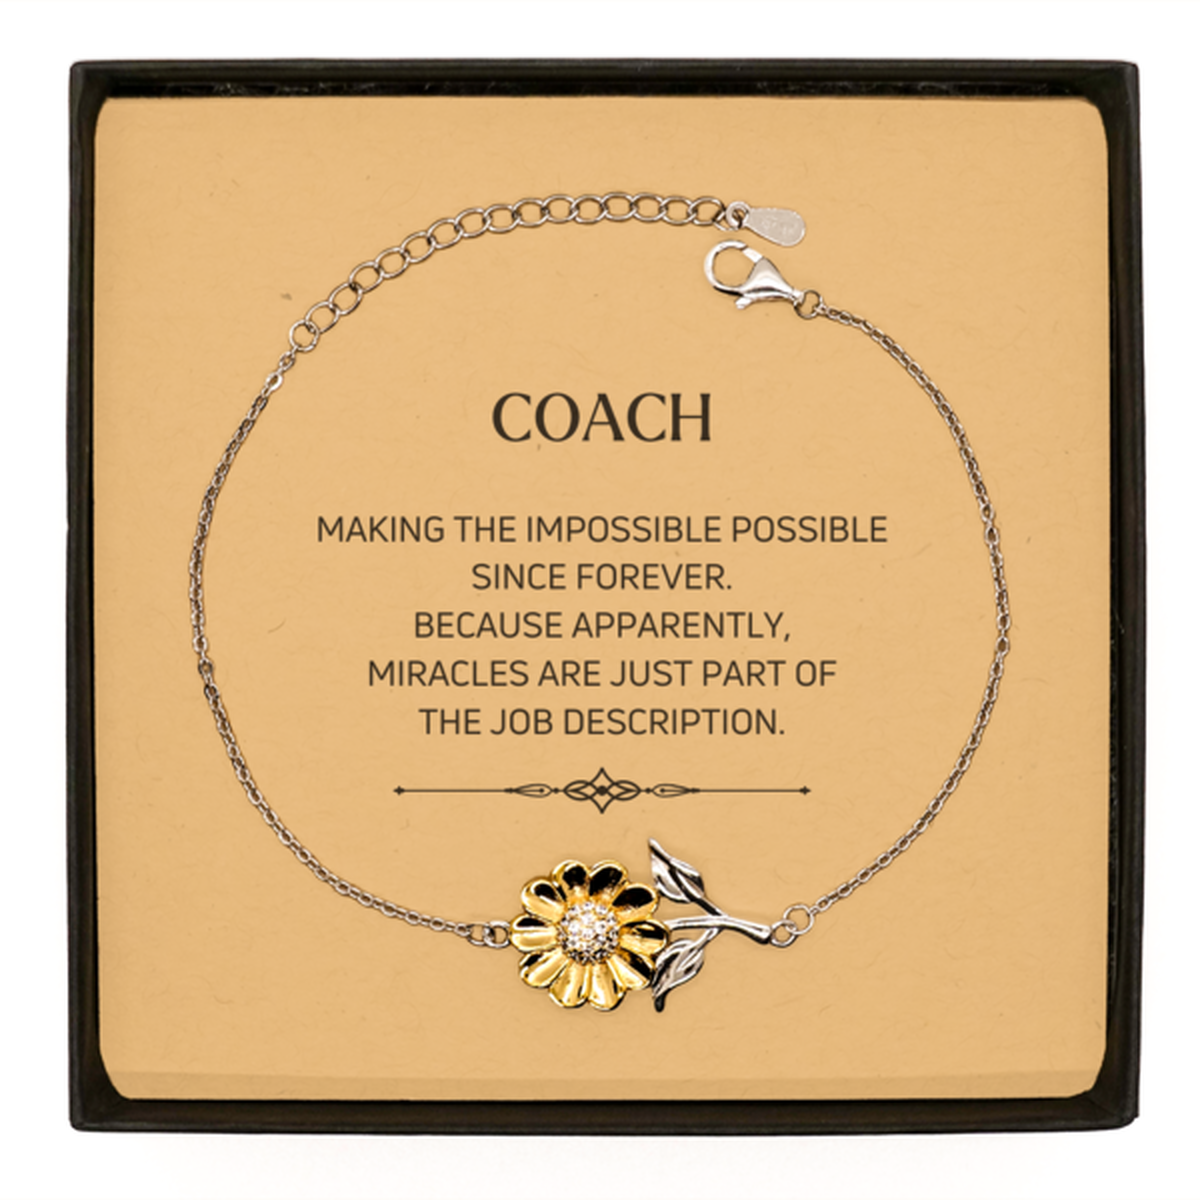 Funny Coach Gifts, Miracles are just part of the job description, Inspirational Birthday Sunflower Bracelet For Coach, Men, Women, Coworkers, Friends, Boss